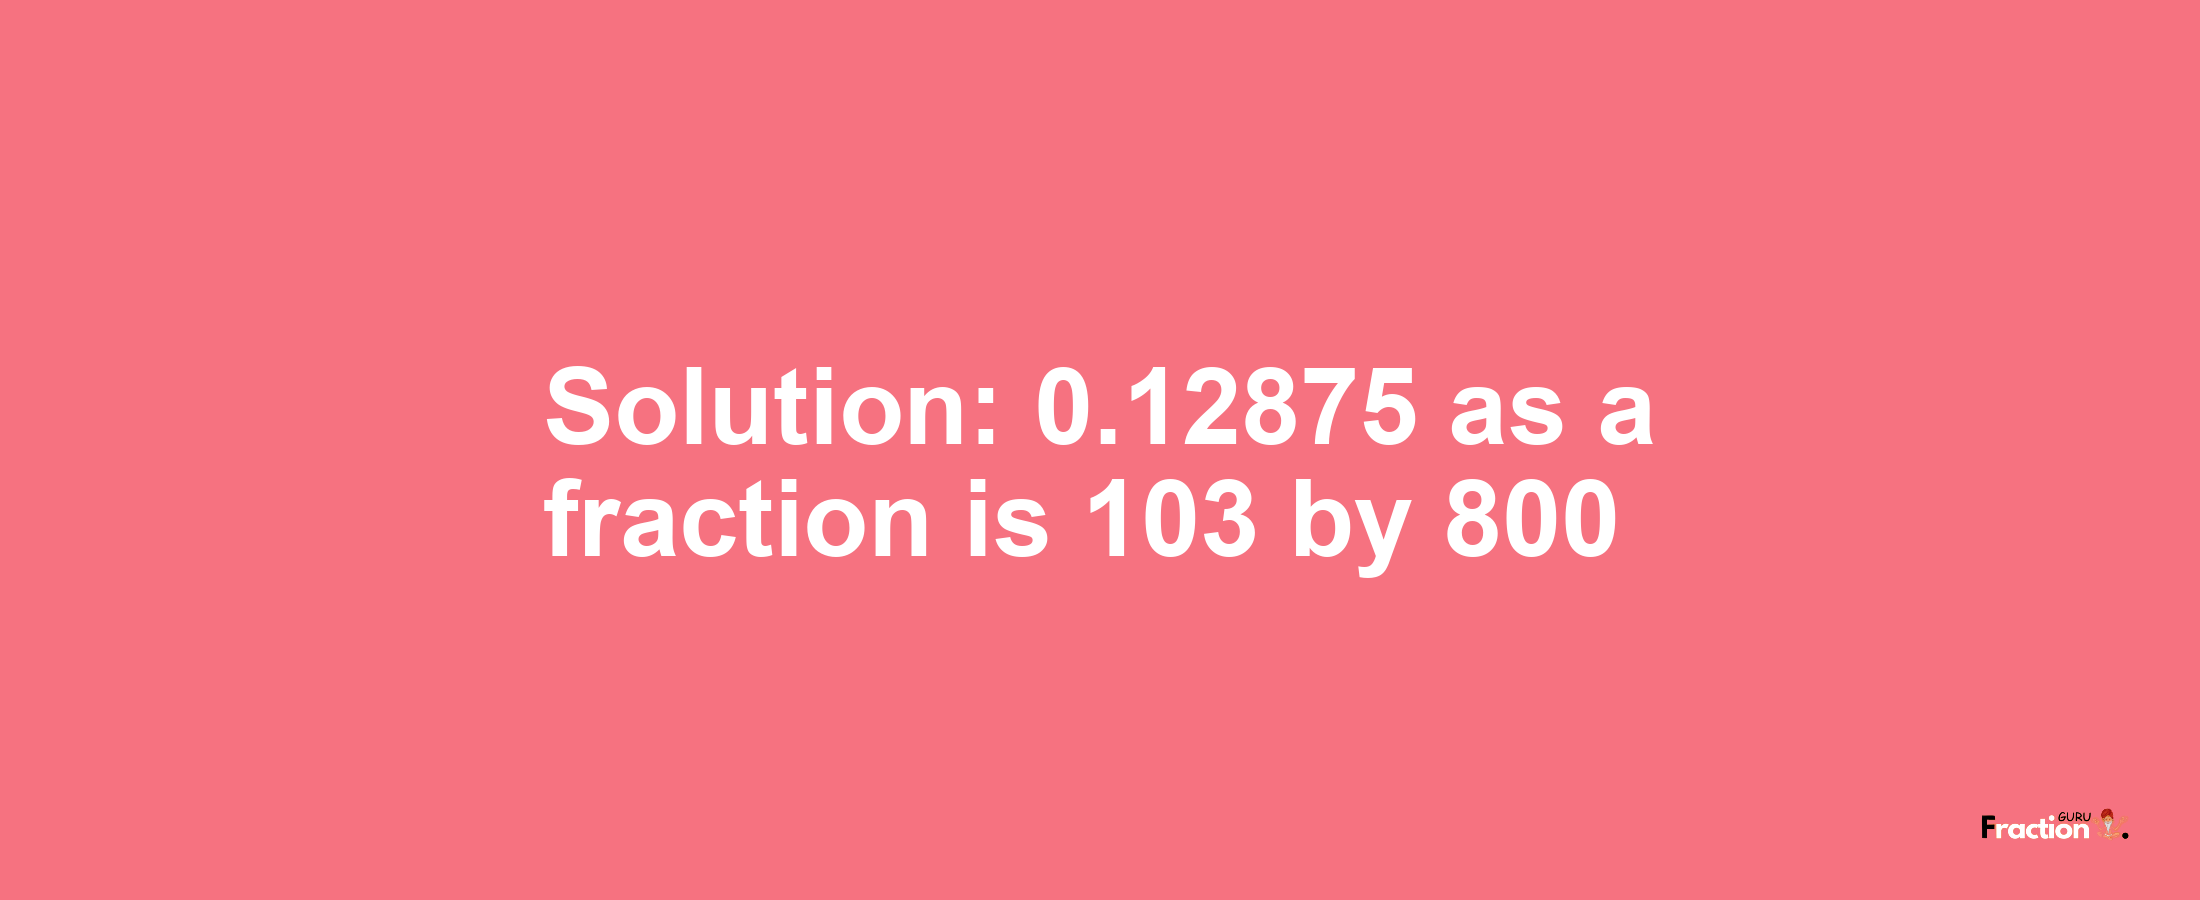 Solution:0.12875 as a fraction is 103/800